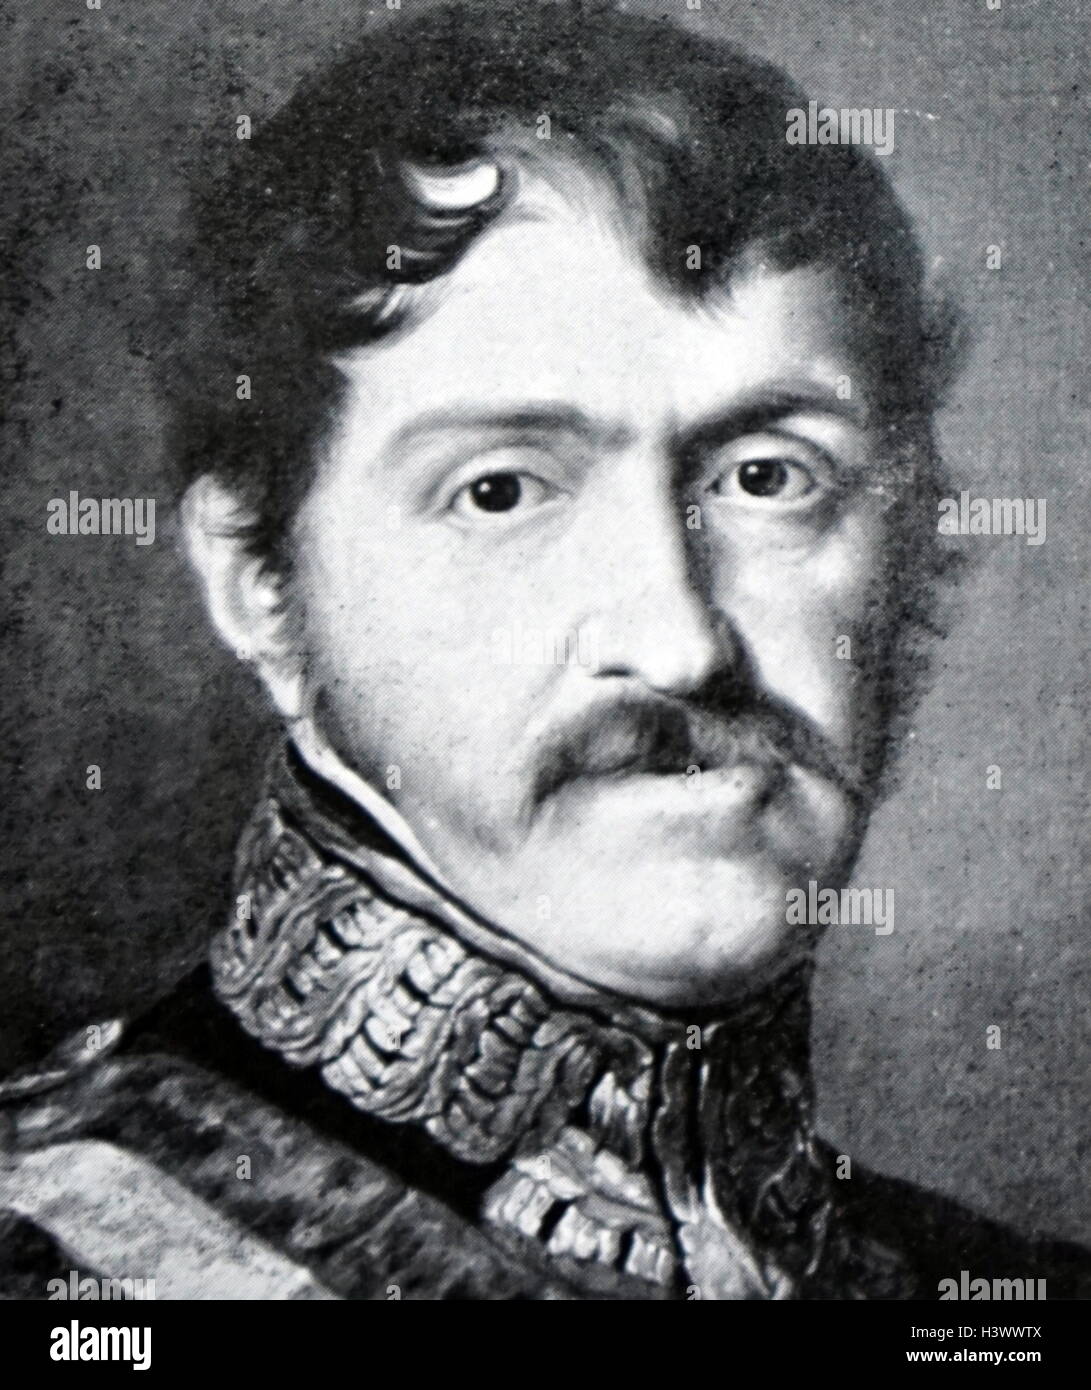 Portrait of Infante Carlos, Count of Molina (1788-1855) an Infante of Spain and first of the Carlist claimants to the throne of Spain. Dated 19th Century Stock Photo